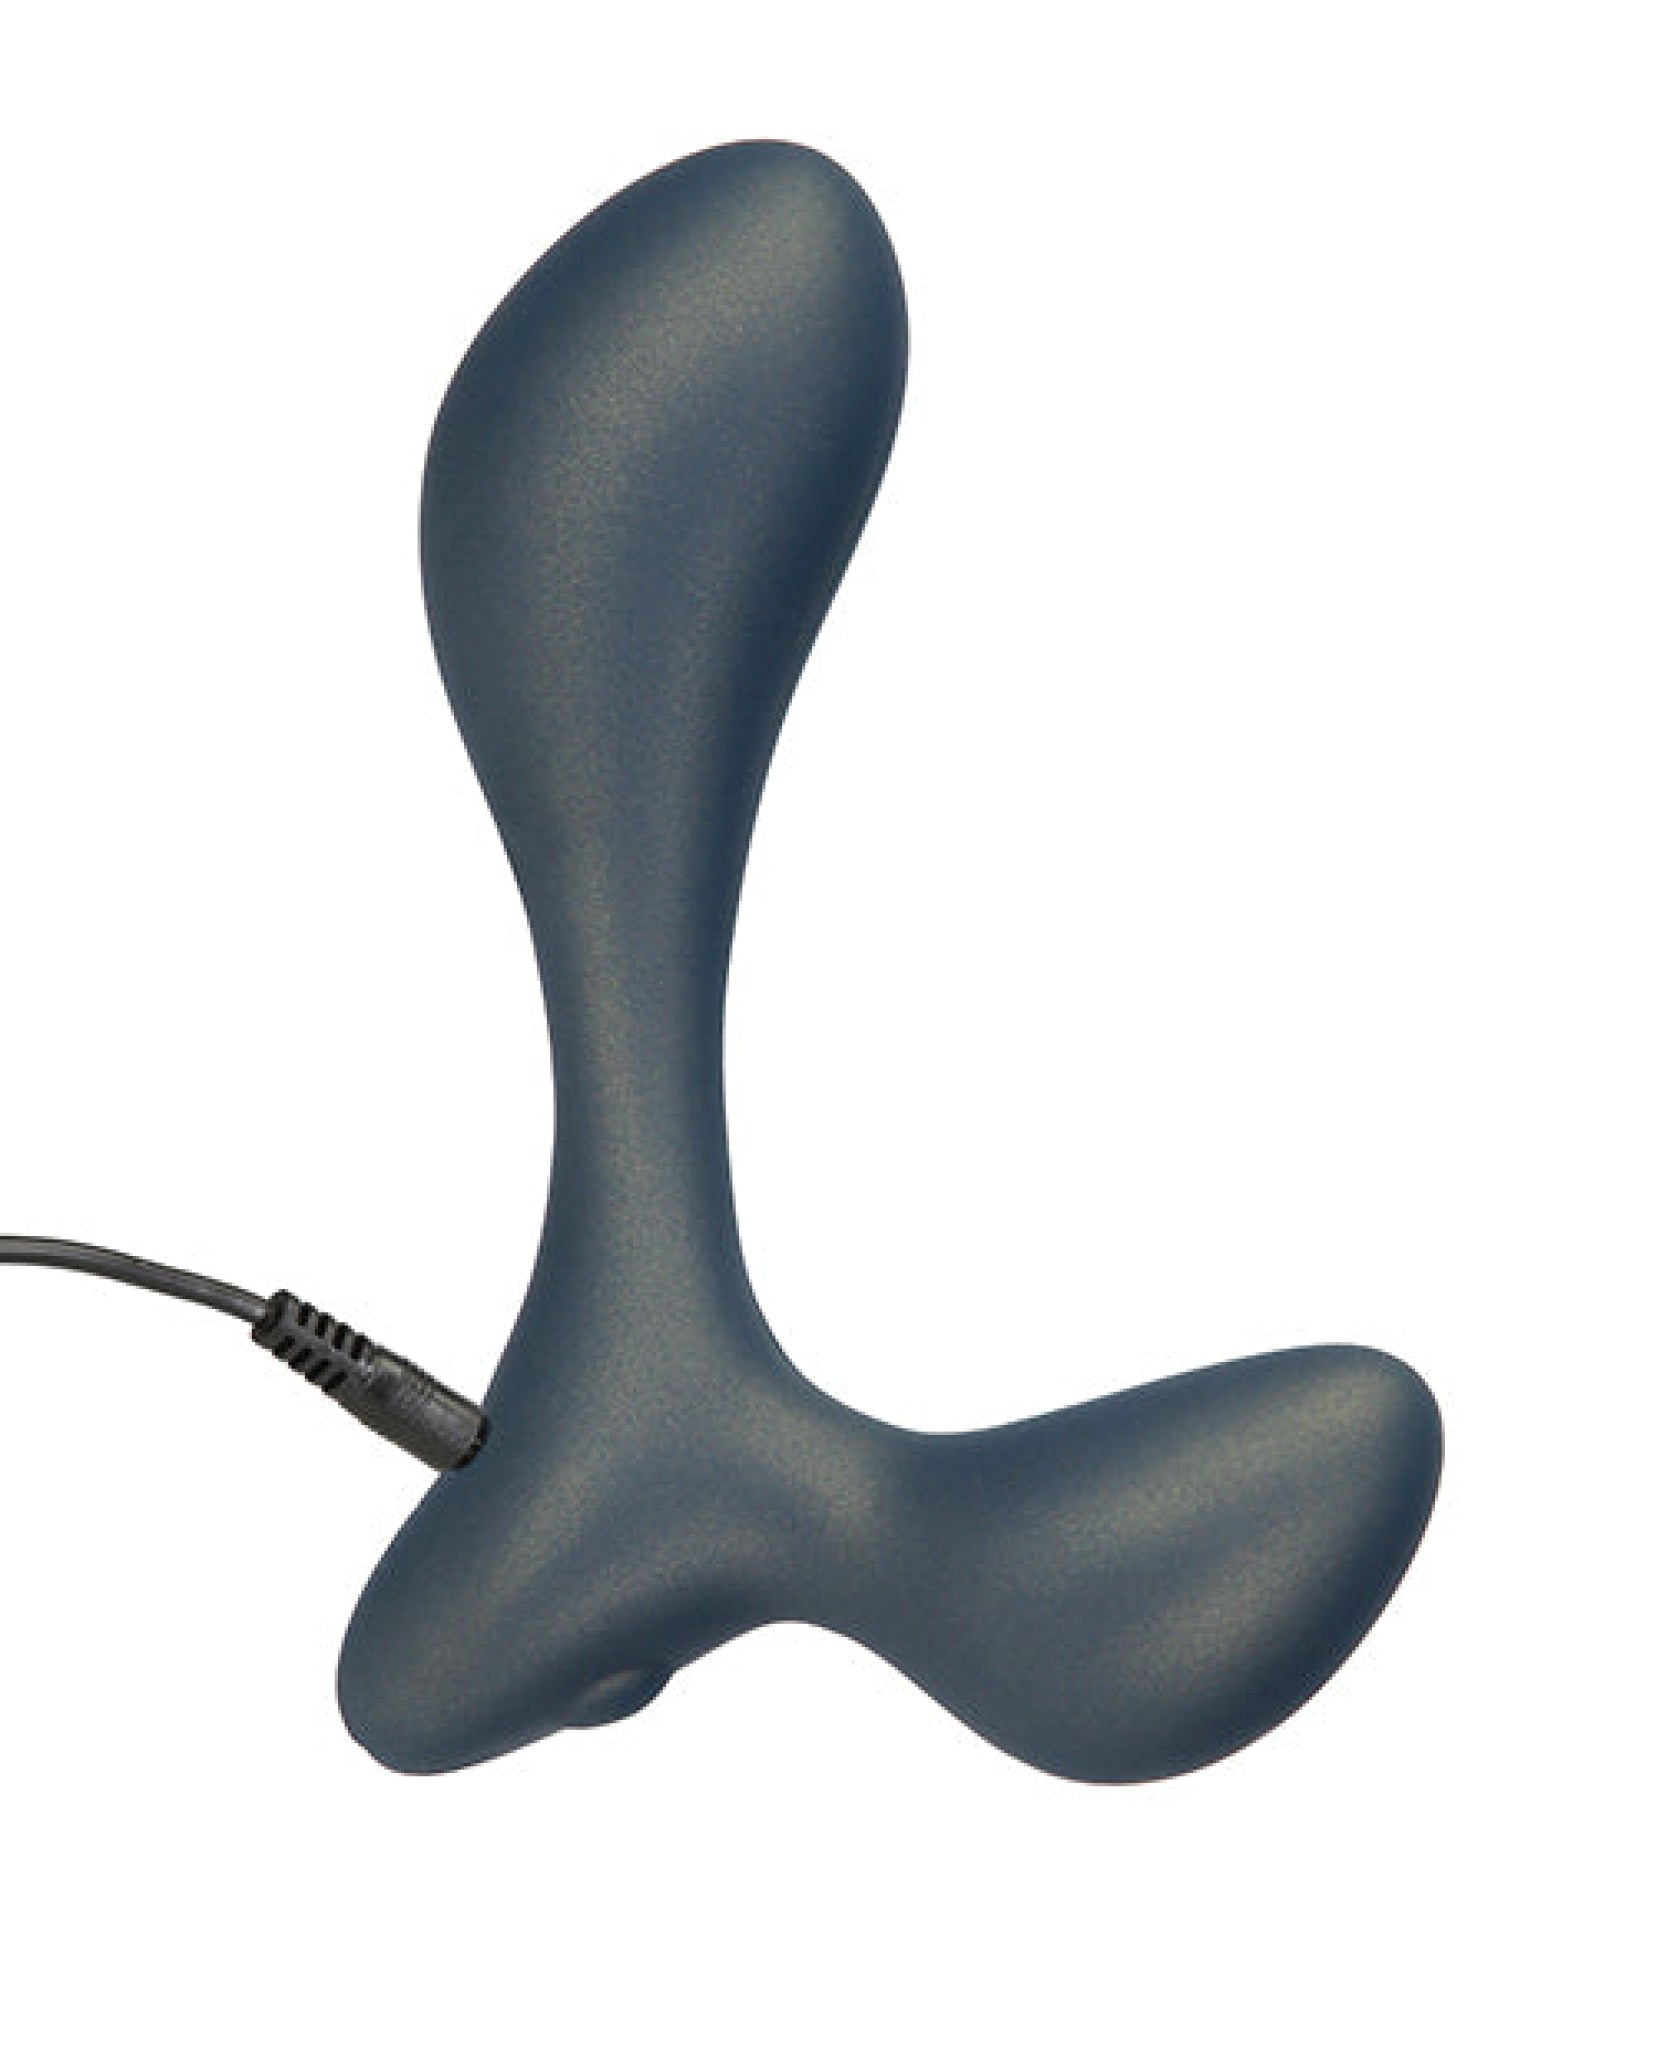 Lux Active Lx3 4.3" Vibrating Anal Trainer - Dark Blue BMS